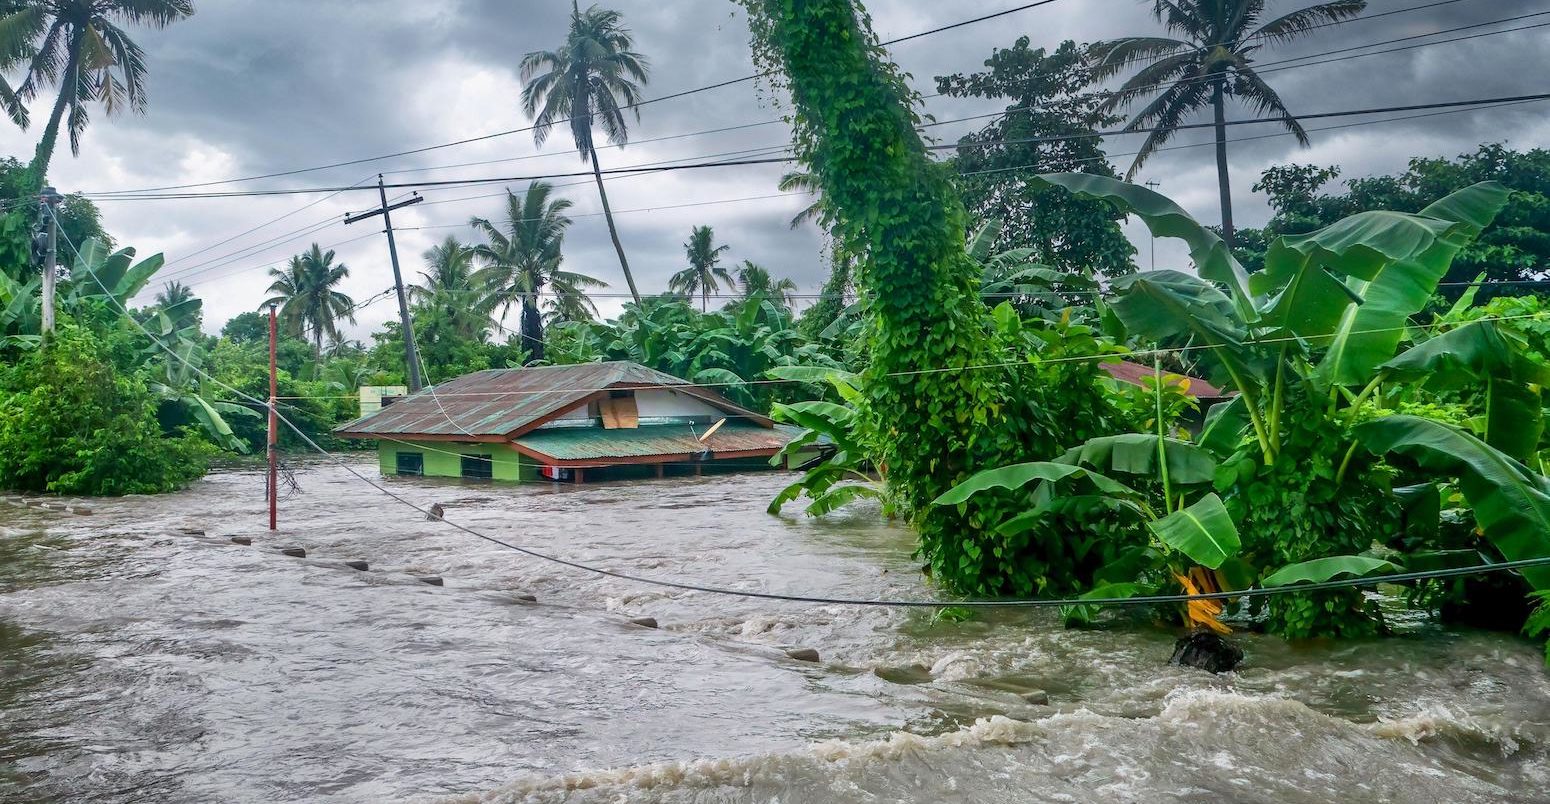 Rising water levels submerge a house as heavy monsoon rains cause major floods in Philippines